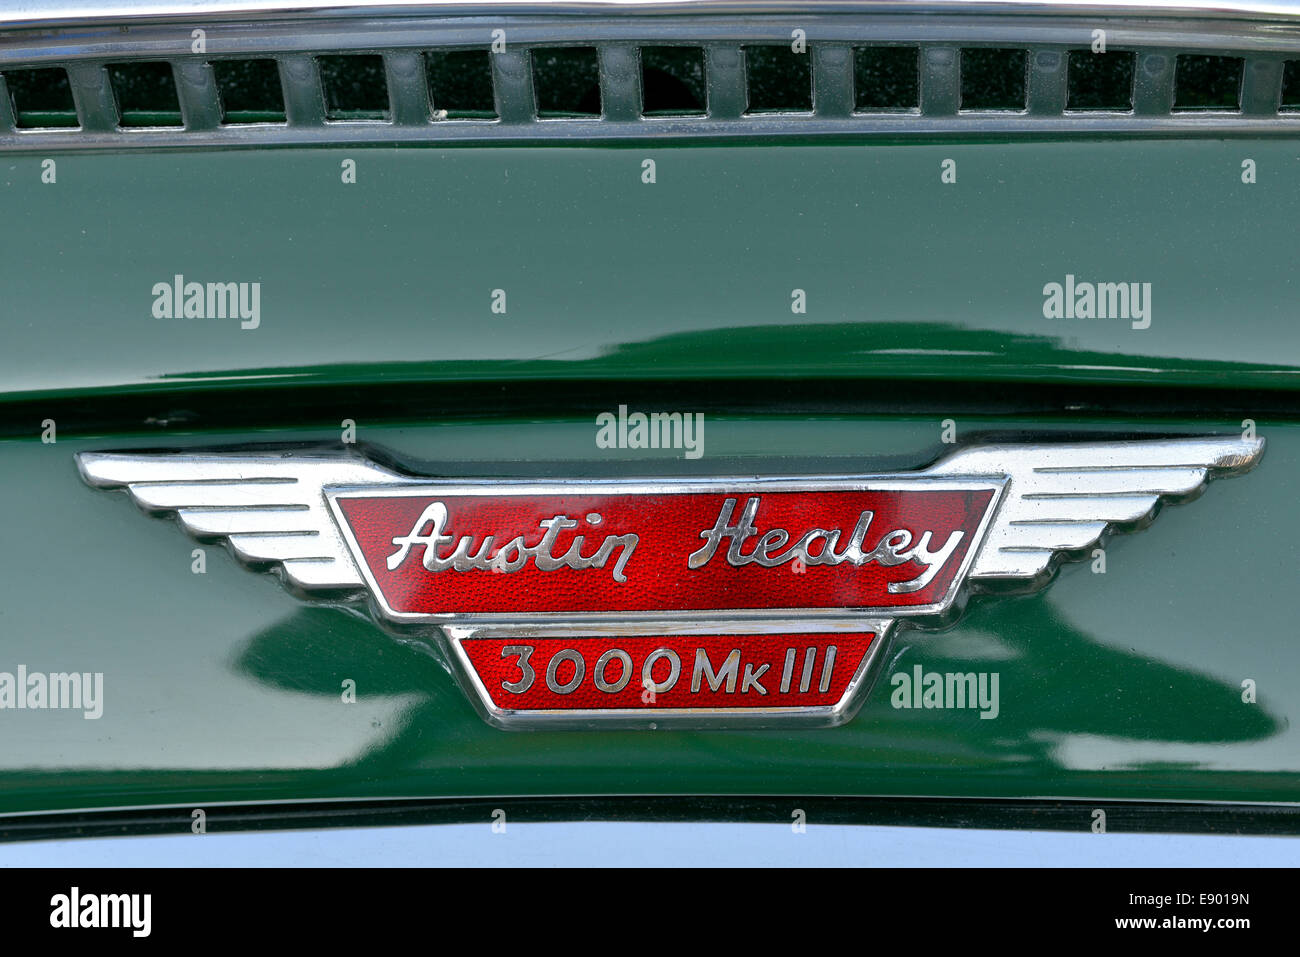 1967 Austin Healey 3000MkIII Banque D'Images